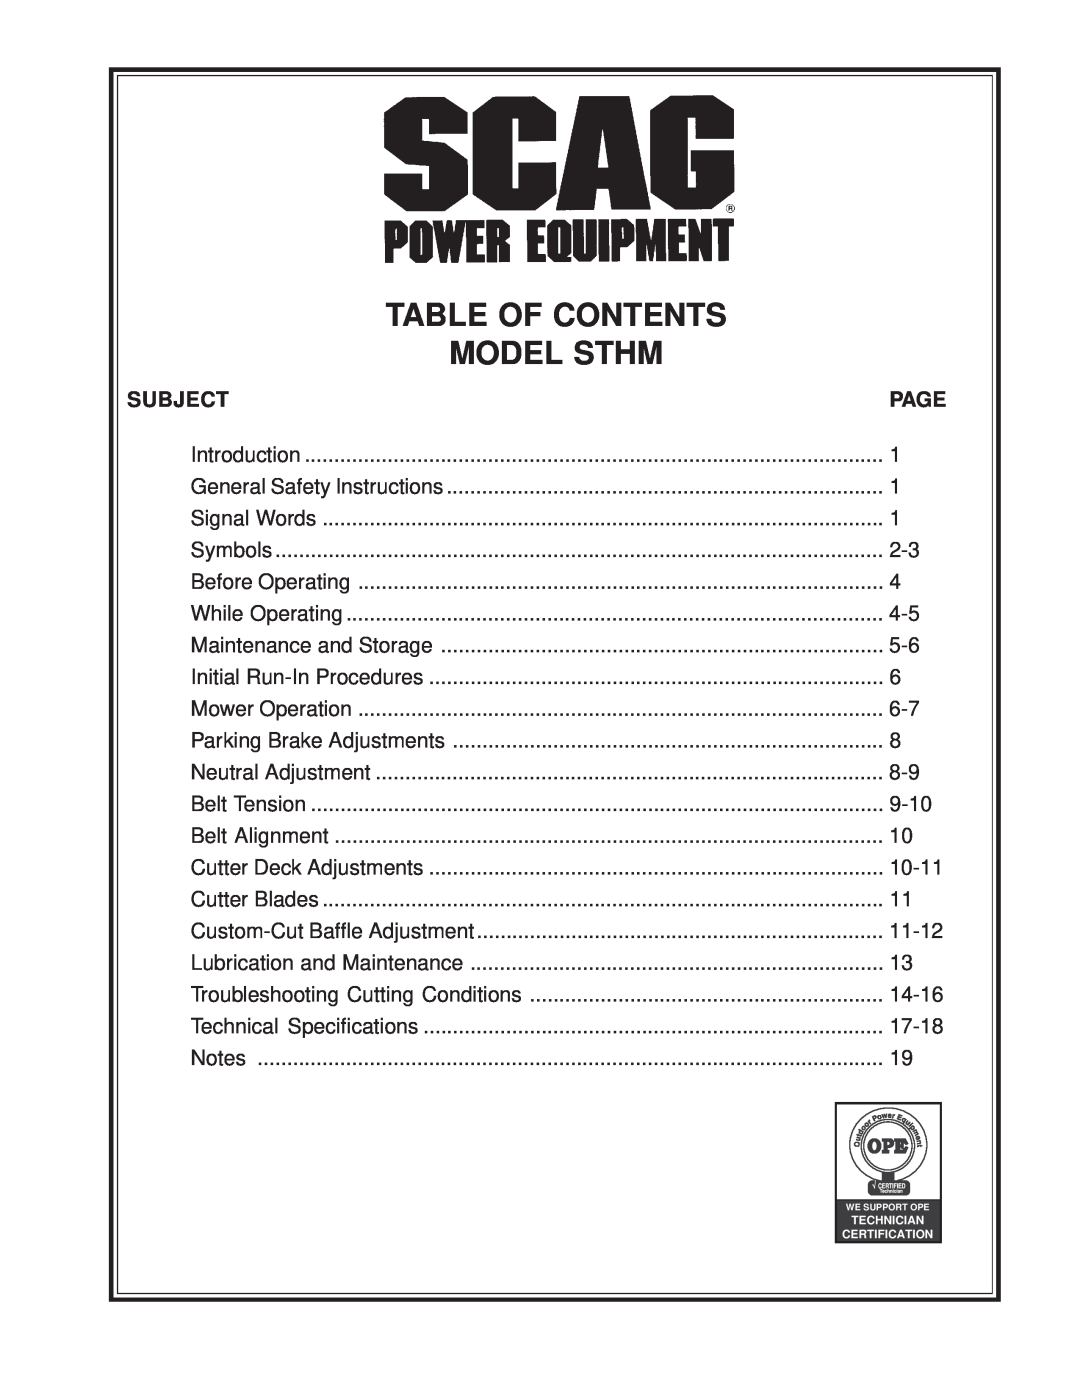 Scag Power Equipment STHM manual Table Of Contents, Model Sthm, Subject 